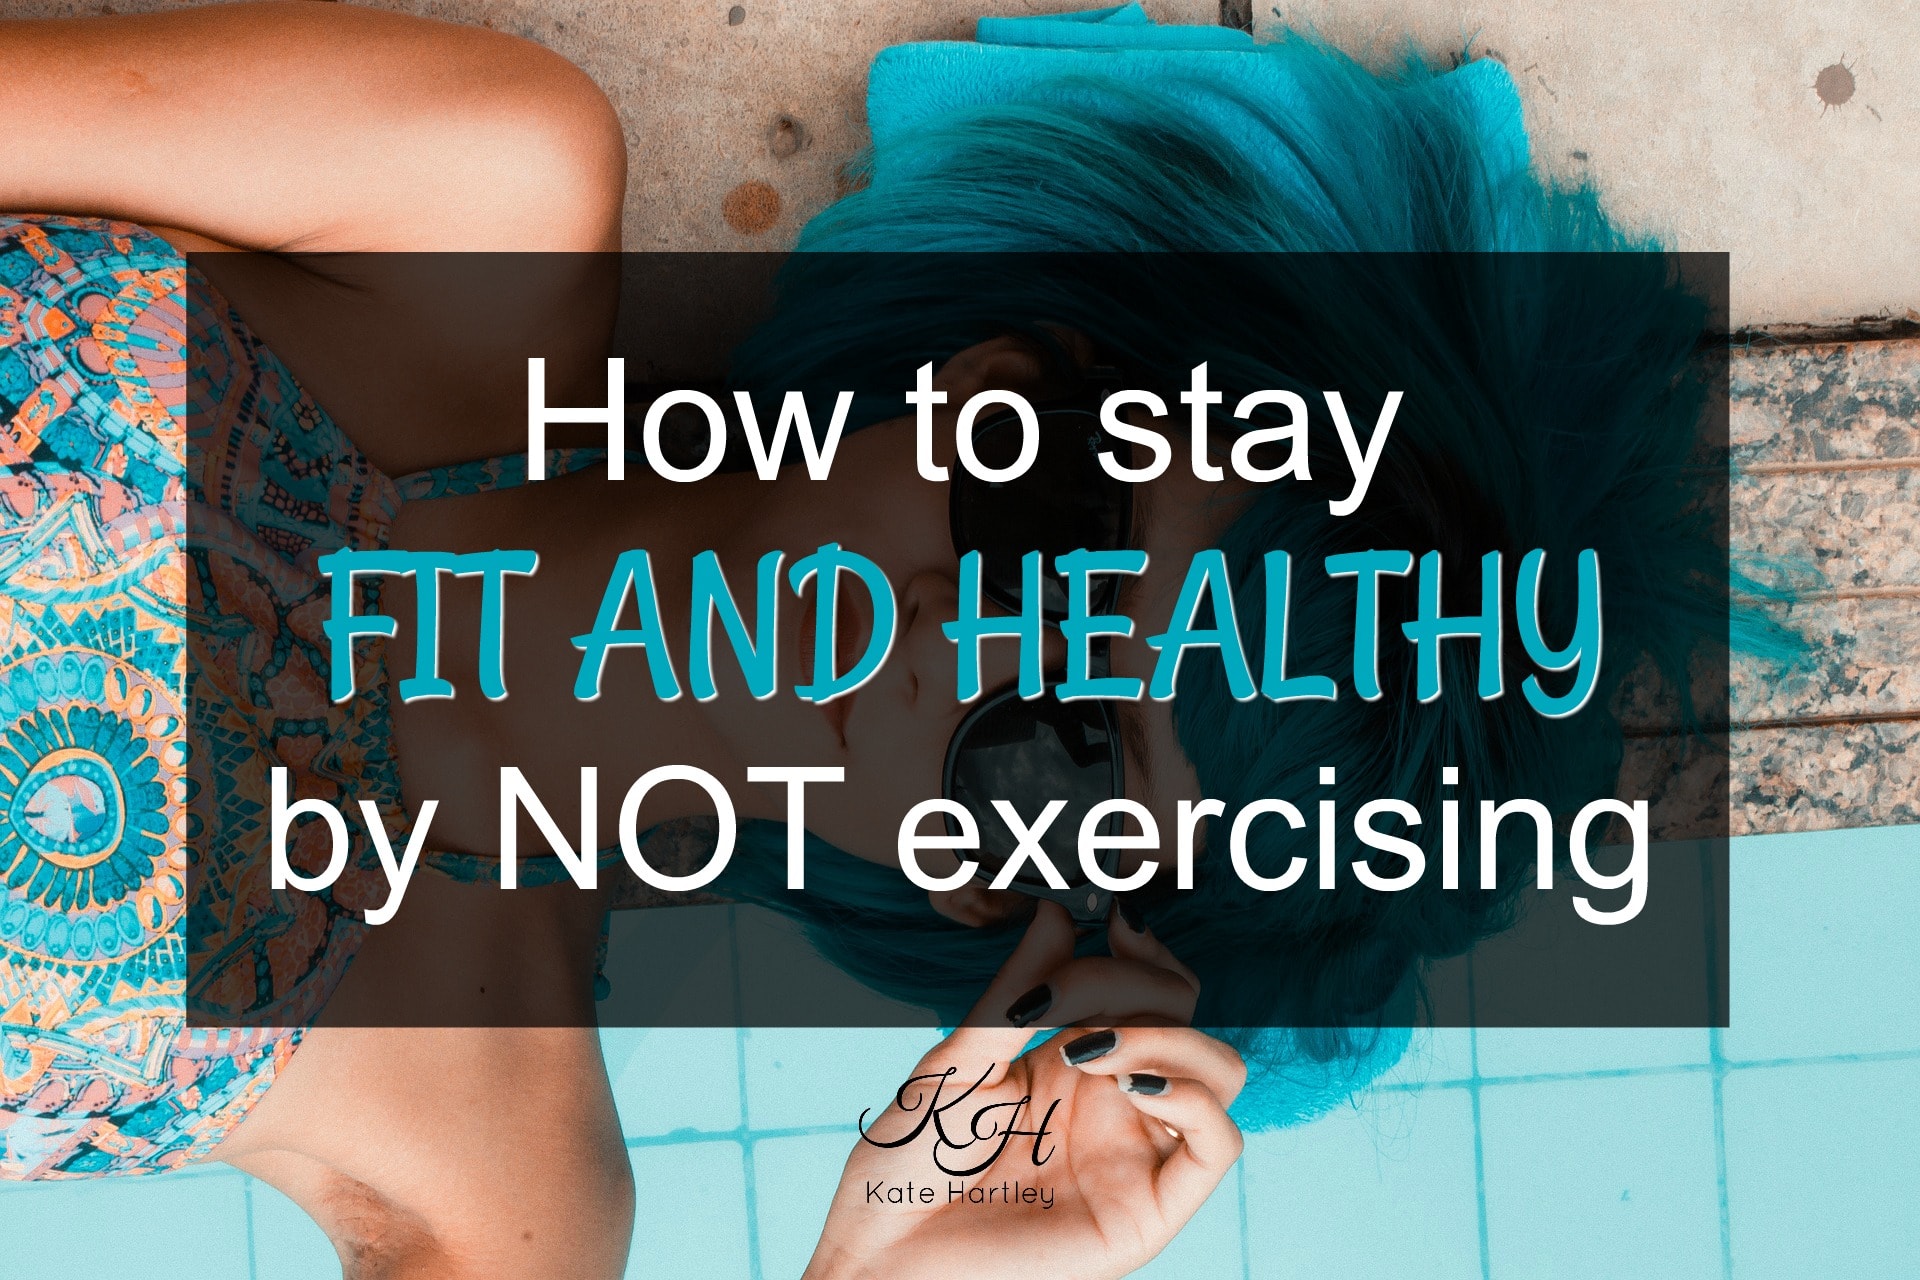 How to stay fit and healthy by not exercising